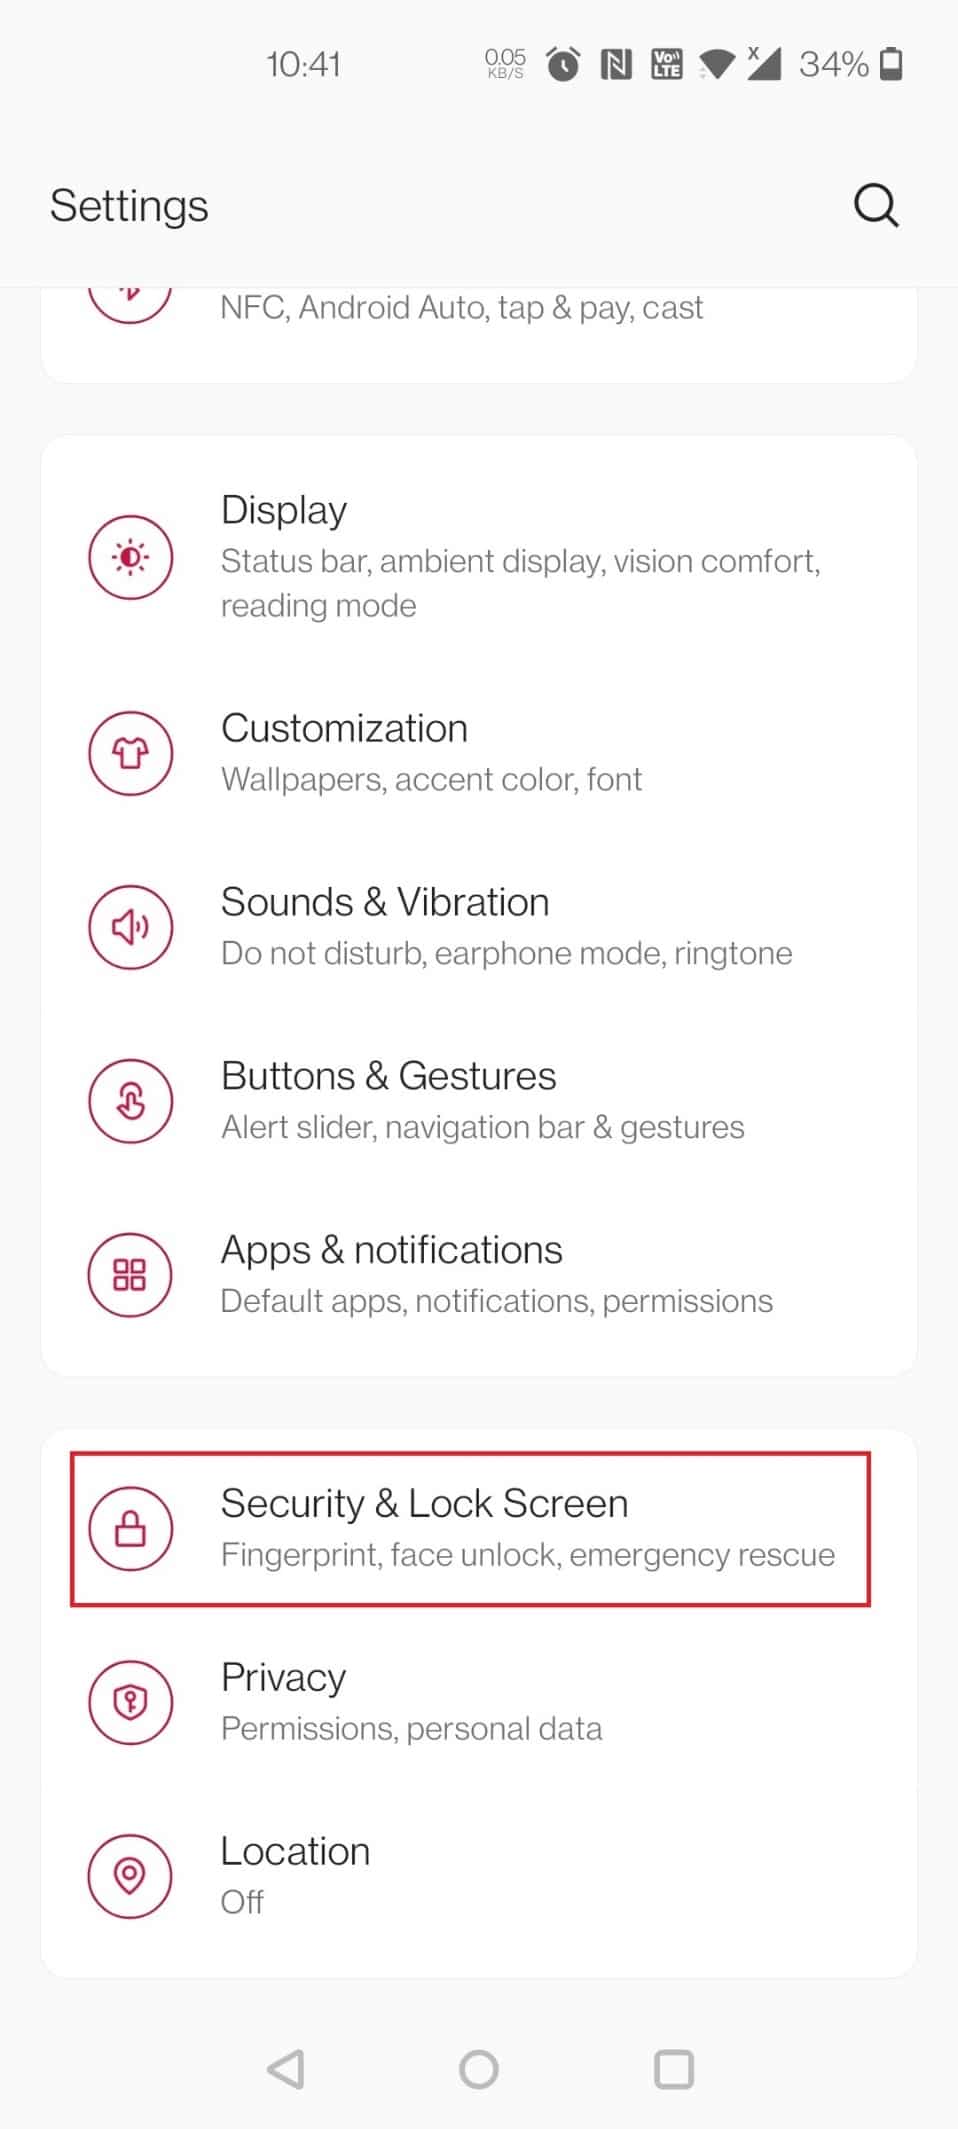 Tap on Security and Lock Screen